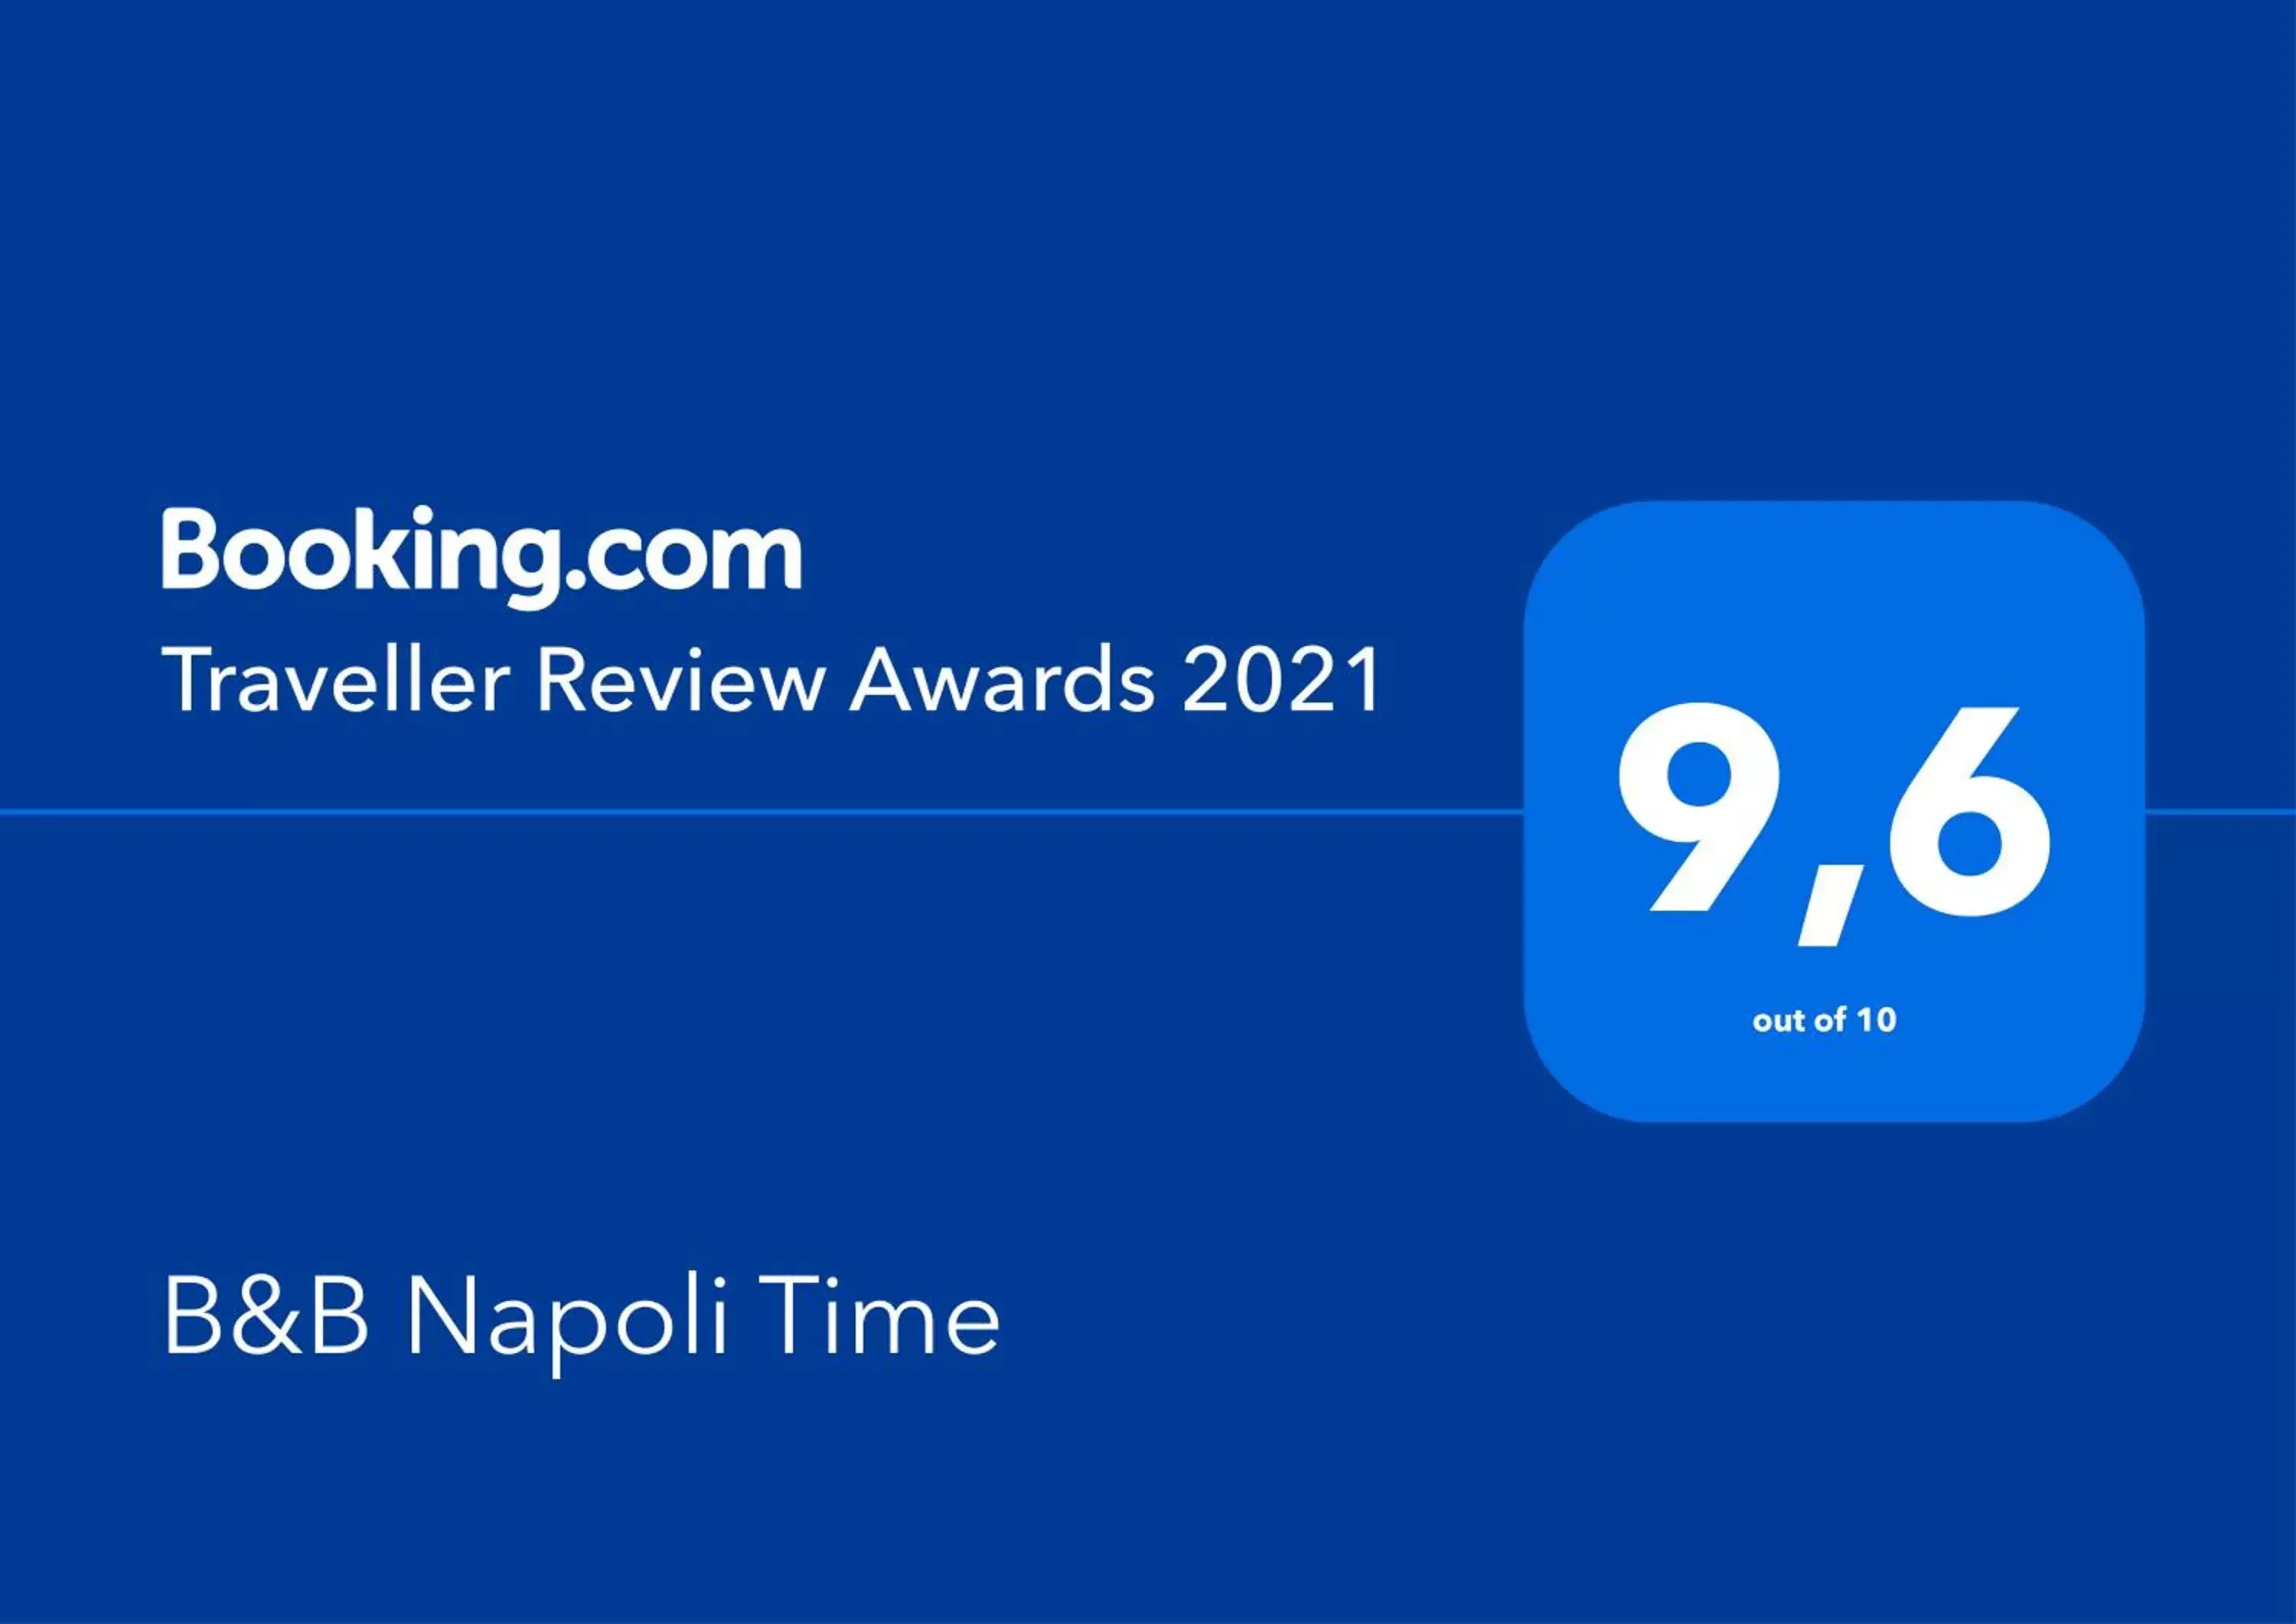 Guests, Logo/Certificate/Sign/Award in B&B Napoli Time